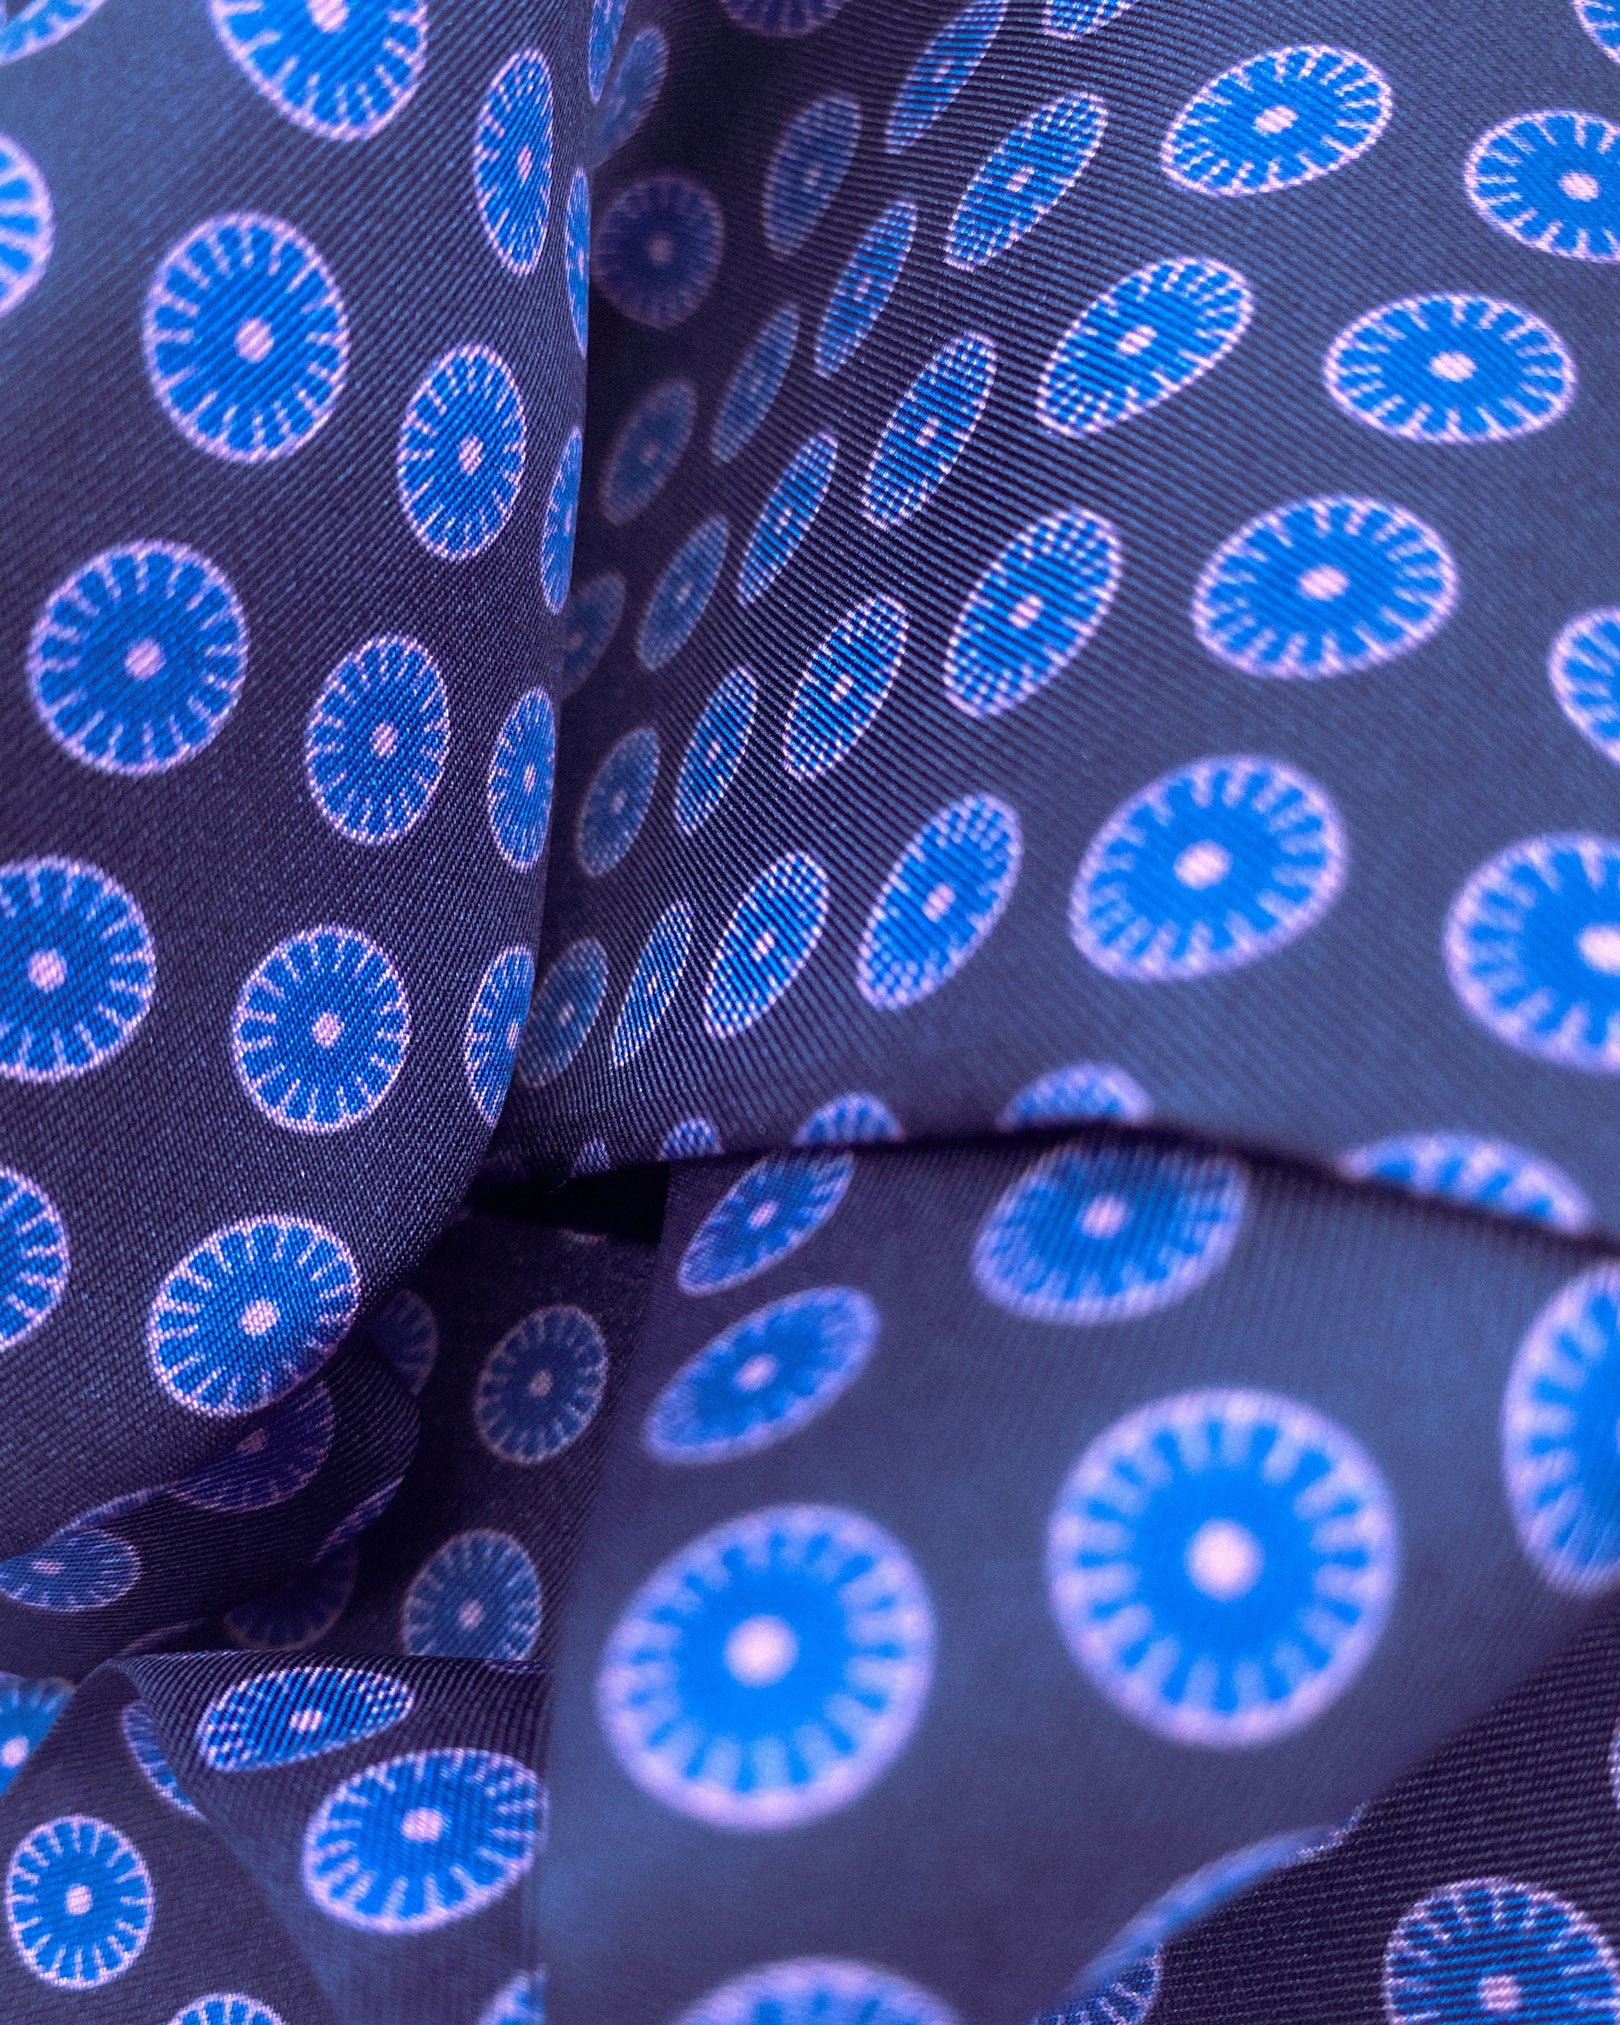 A ruffled close-up of the 'Skytree' silk scarf, presenting a closer view of the geometric small pale blue and pink discs against the deep blue background.